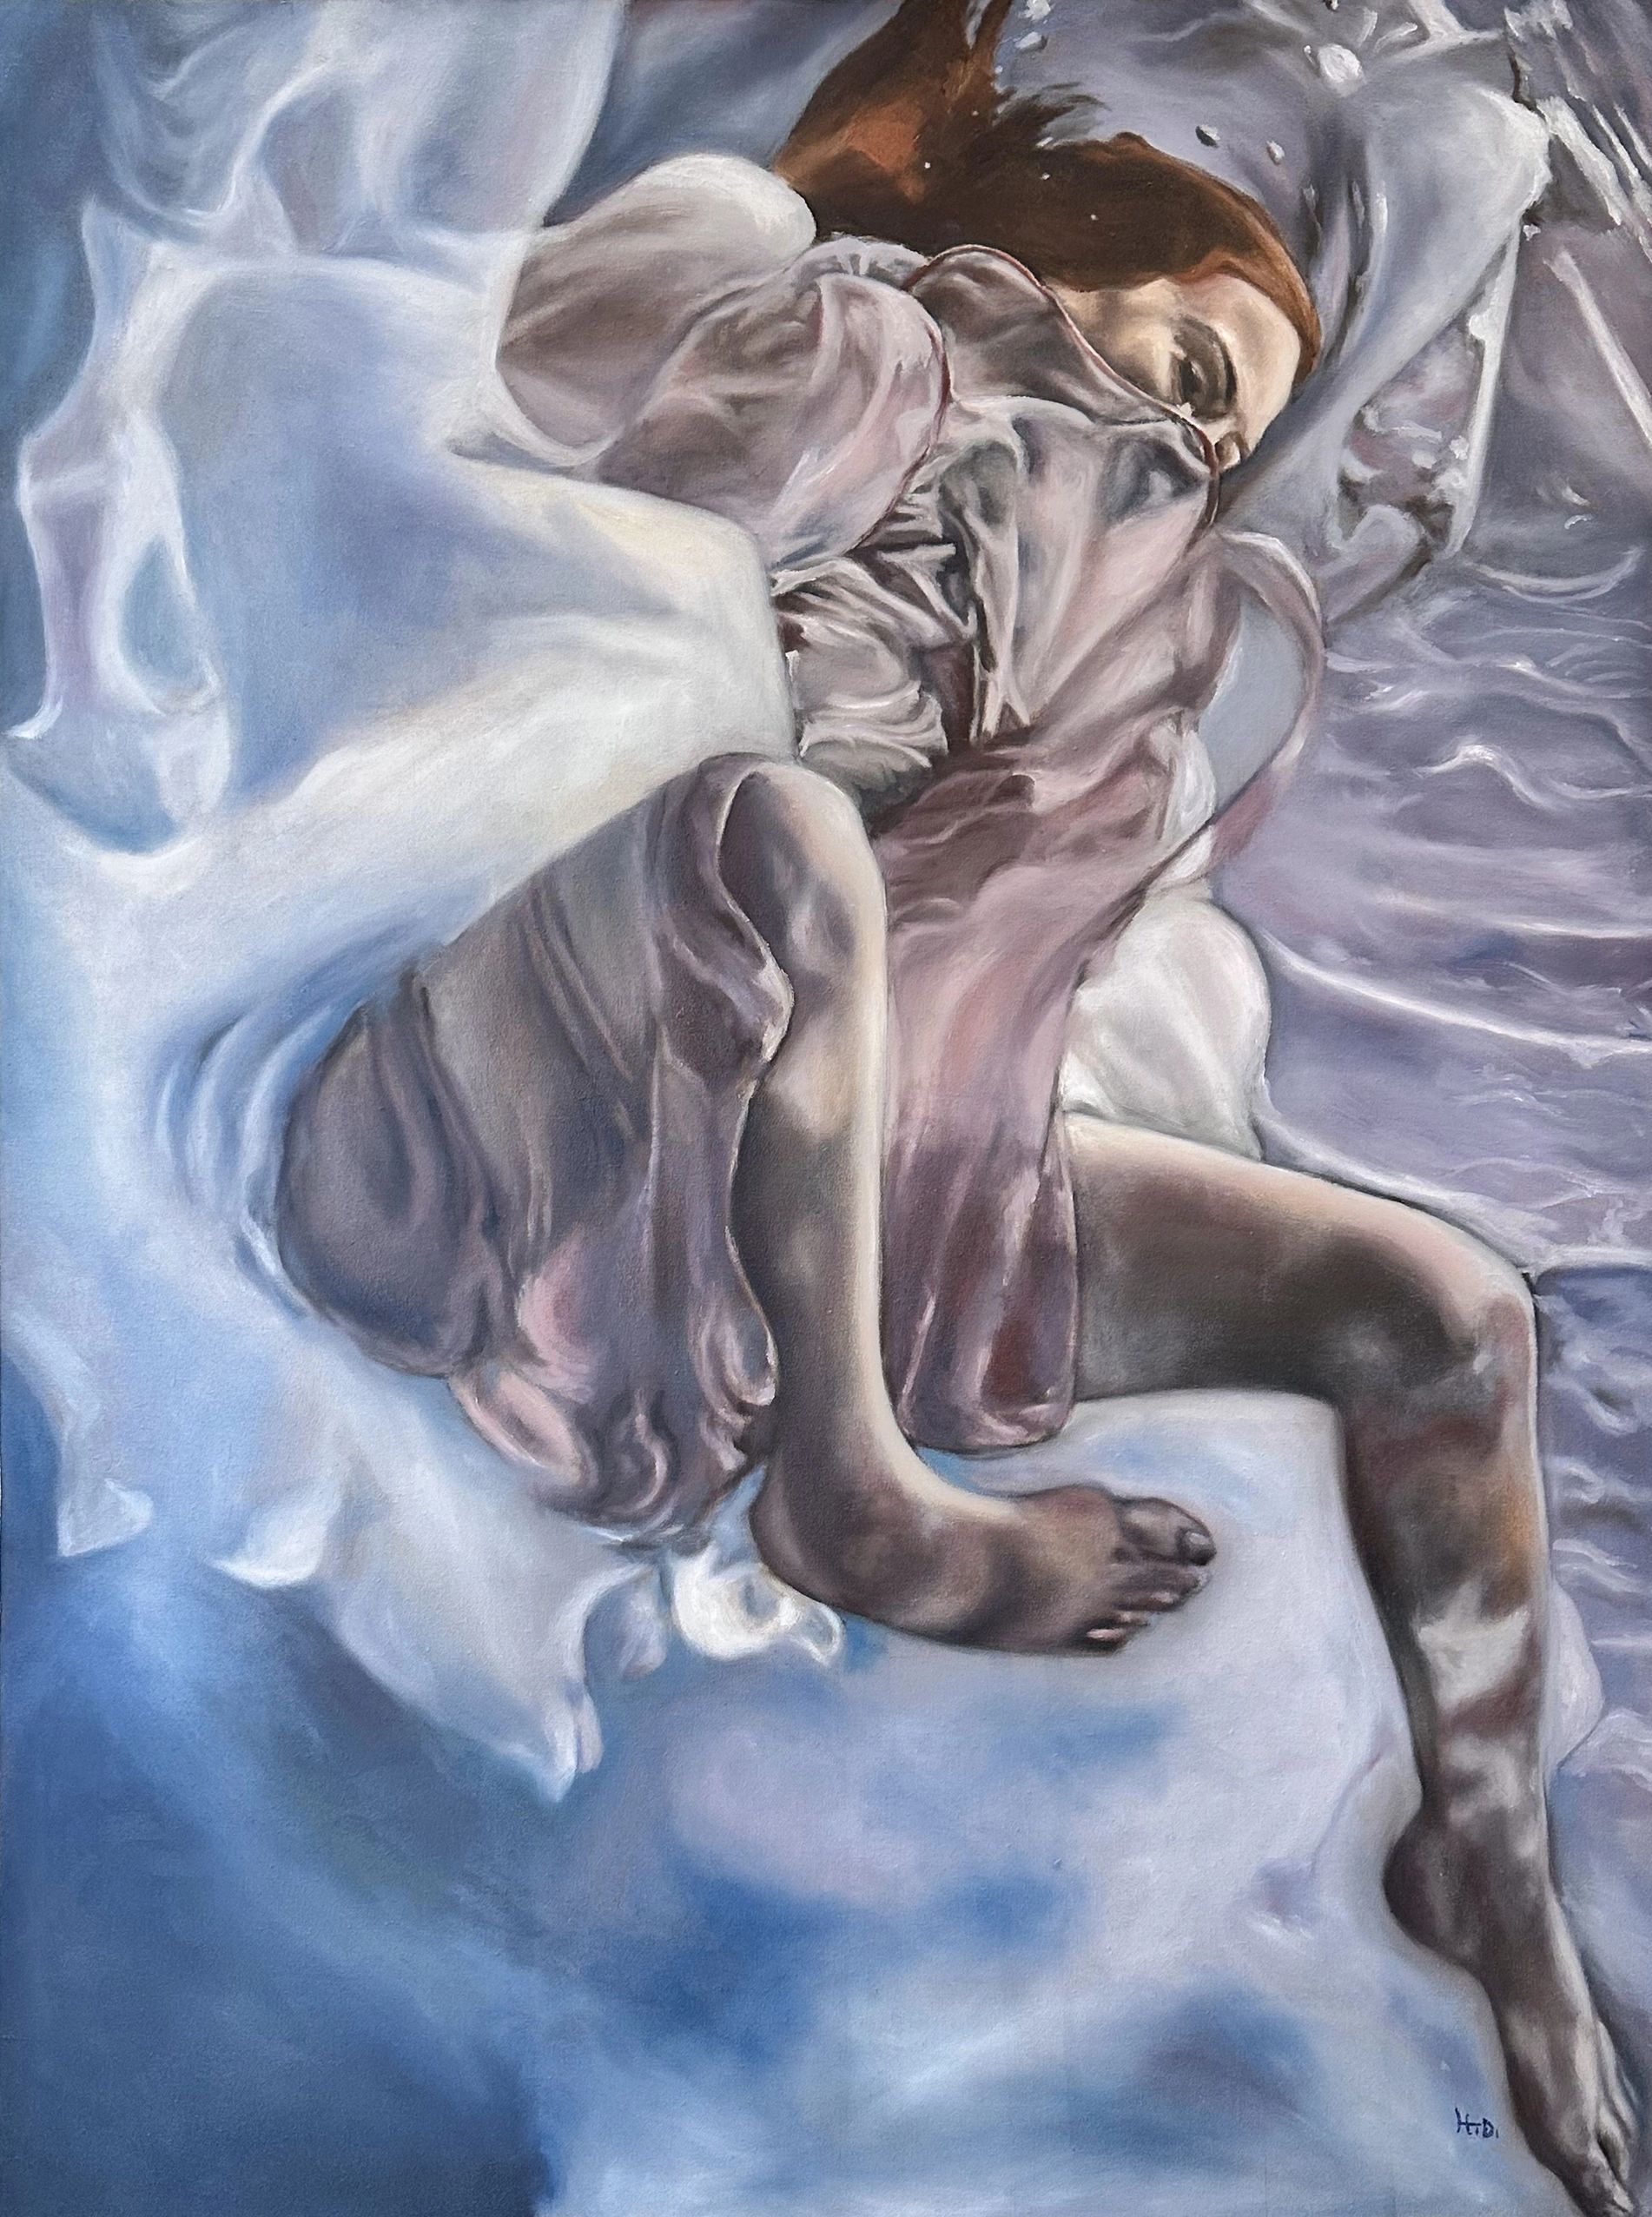 Heidi Bay Art - Sometimes I forget about her - Oil on Canvas - 48"x36"